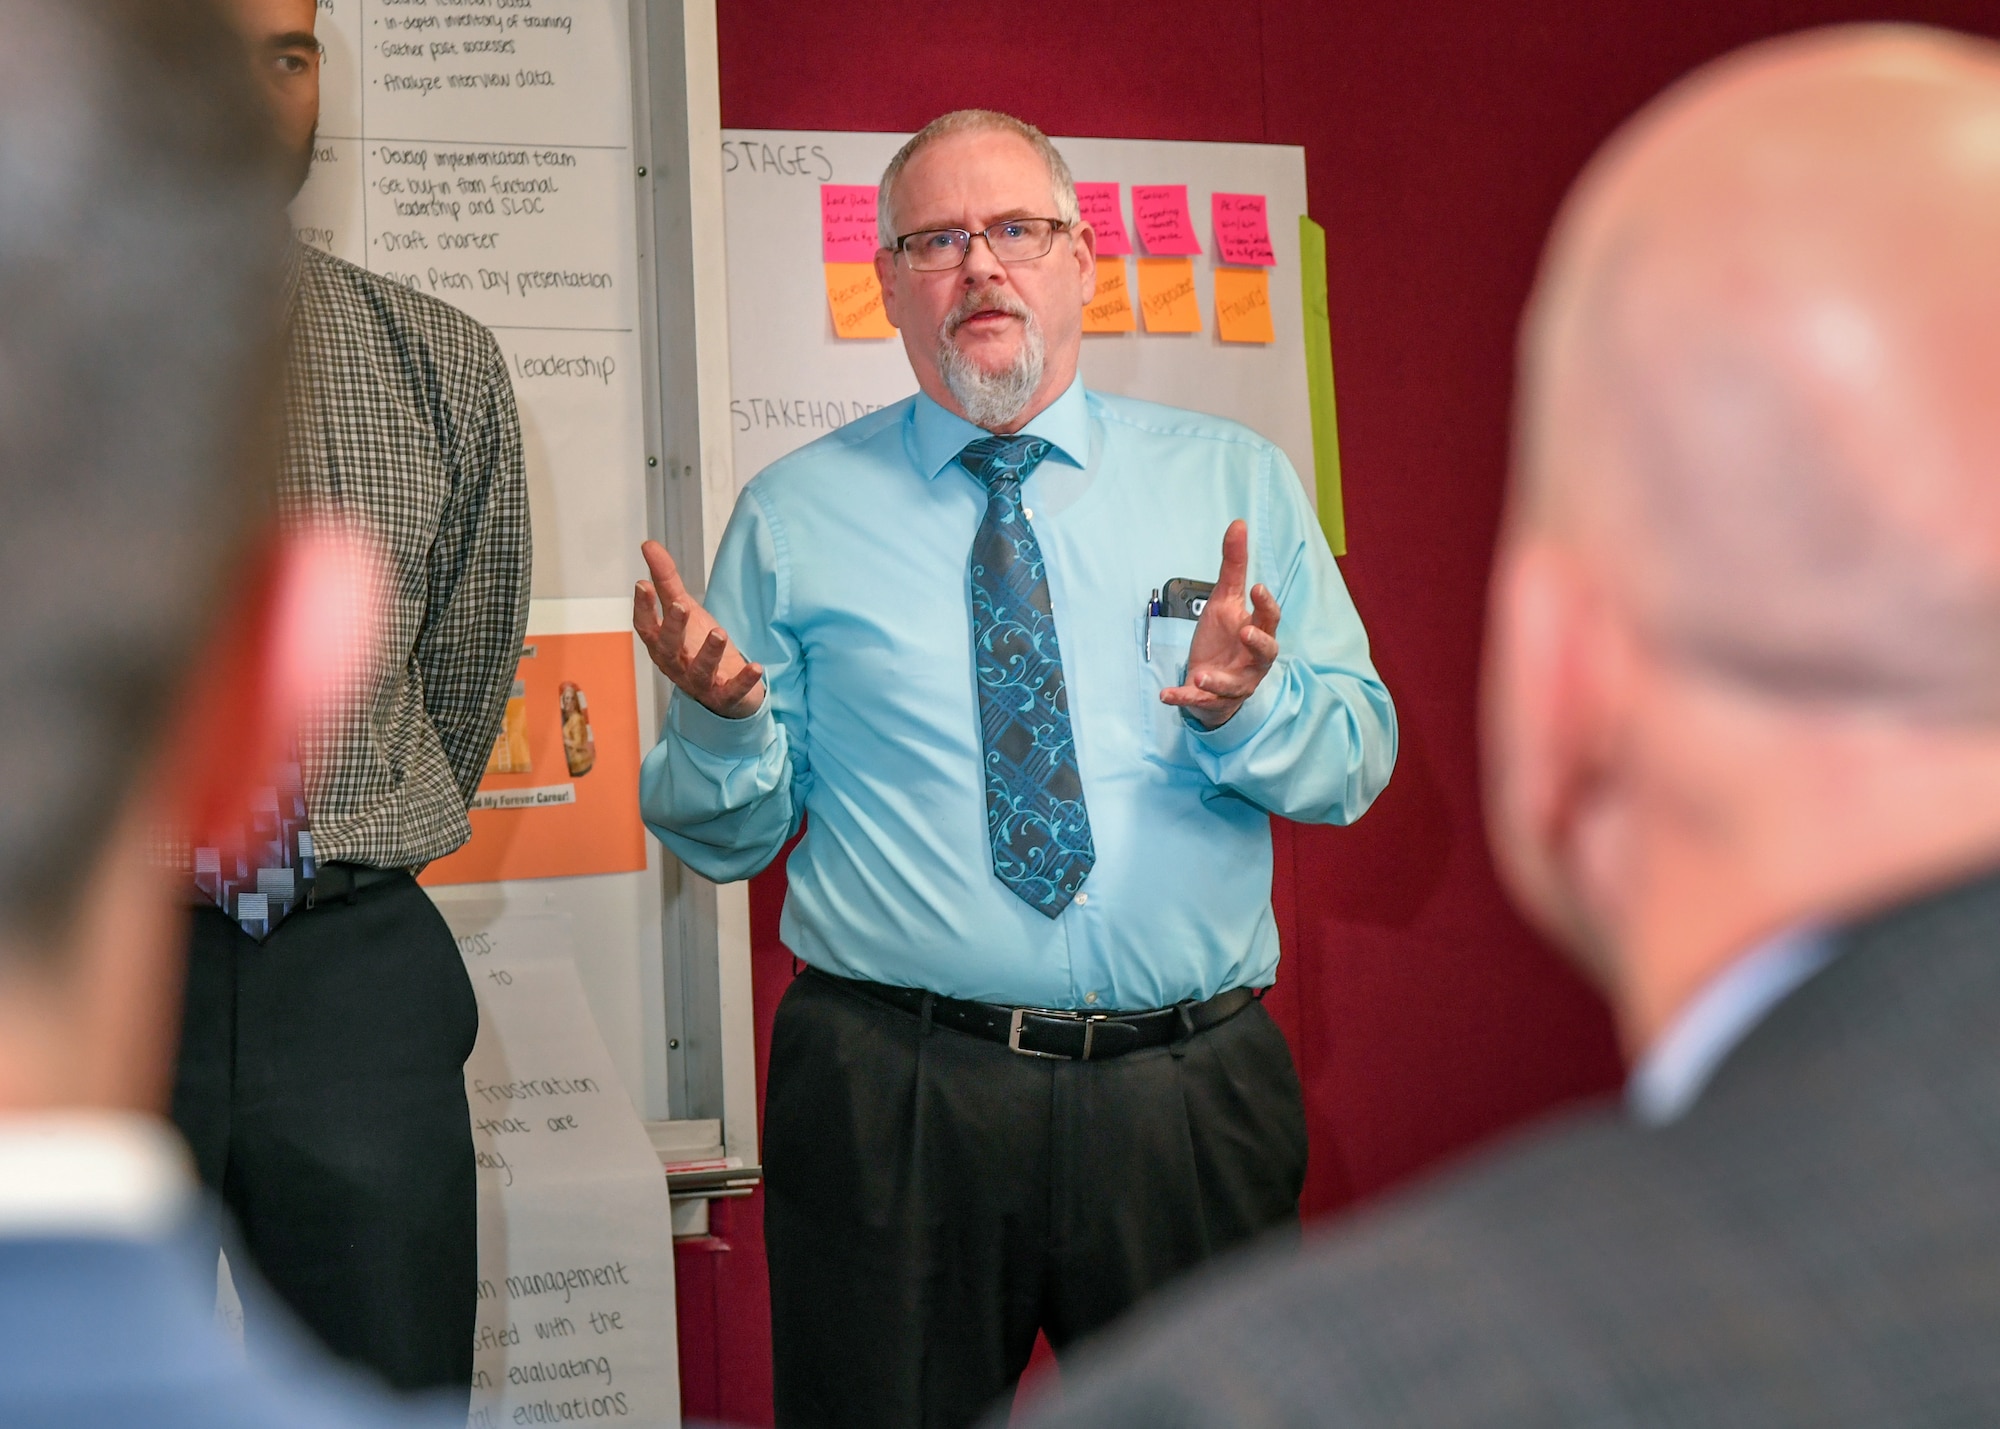 Hanscom and NSIN collaborate to bring innovative ideas forward